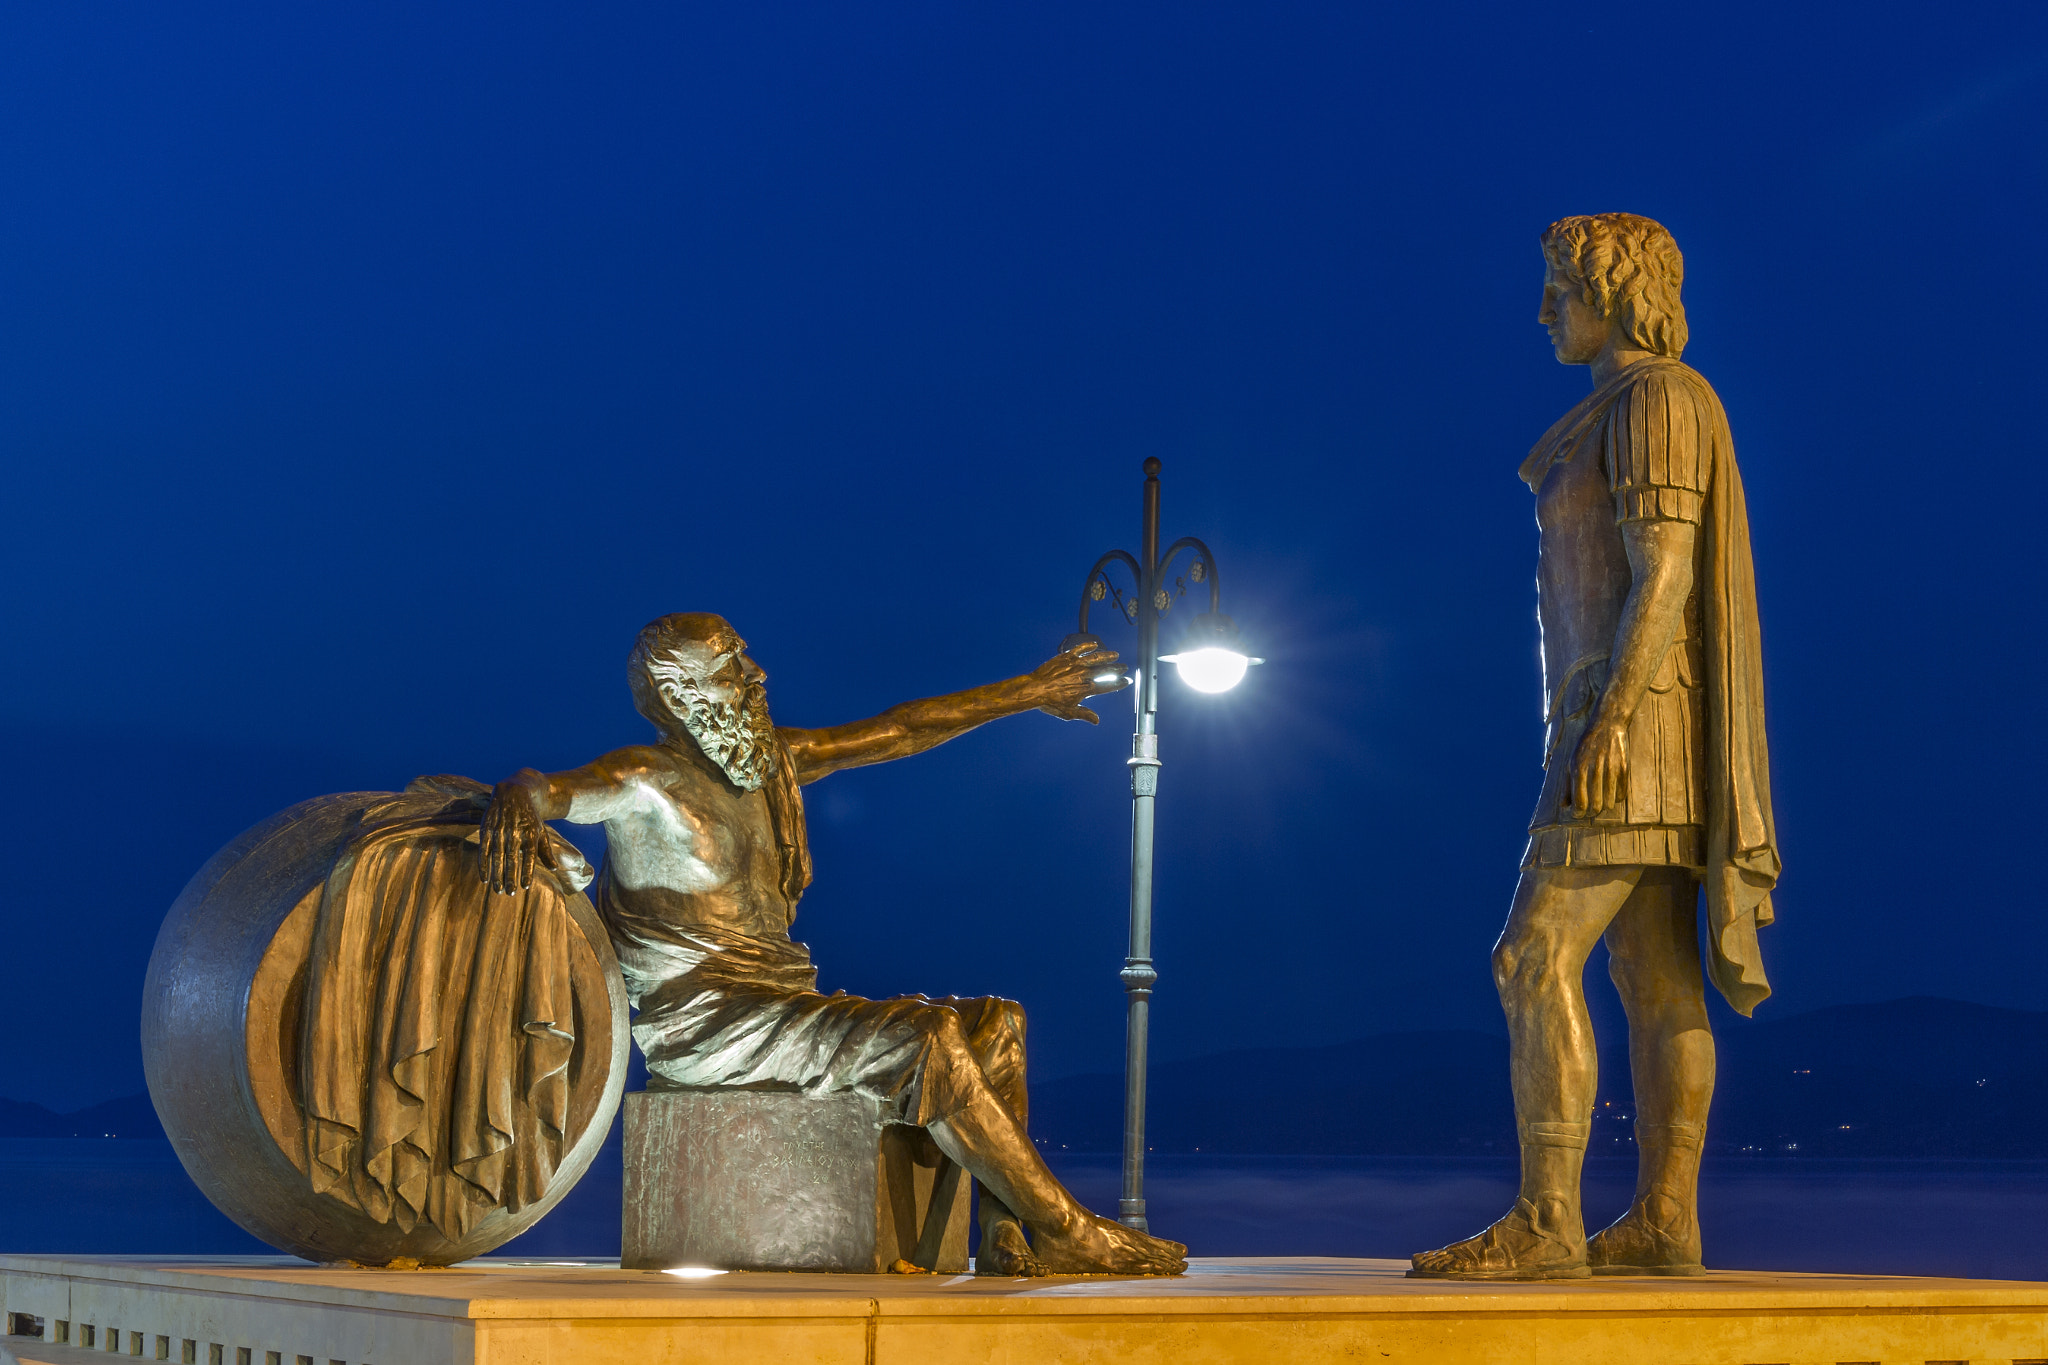 Canon EOS 7D + Sigma 24-105mm f/4 DG OS HSM | A sample photo. Diogenes and alexander the great photography